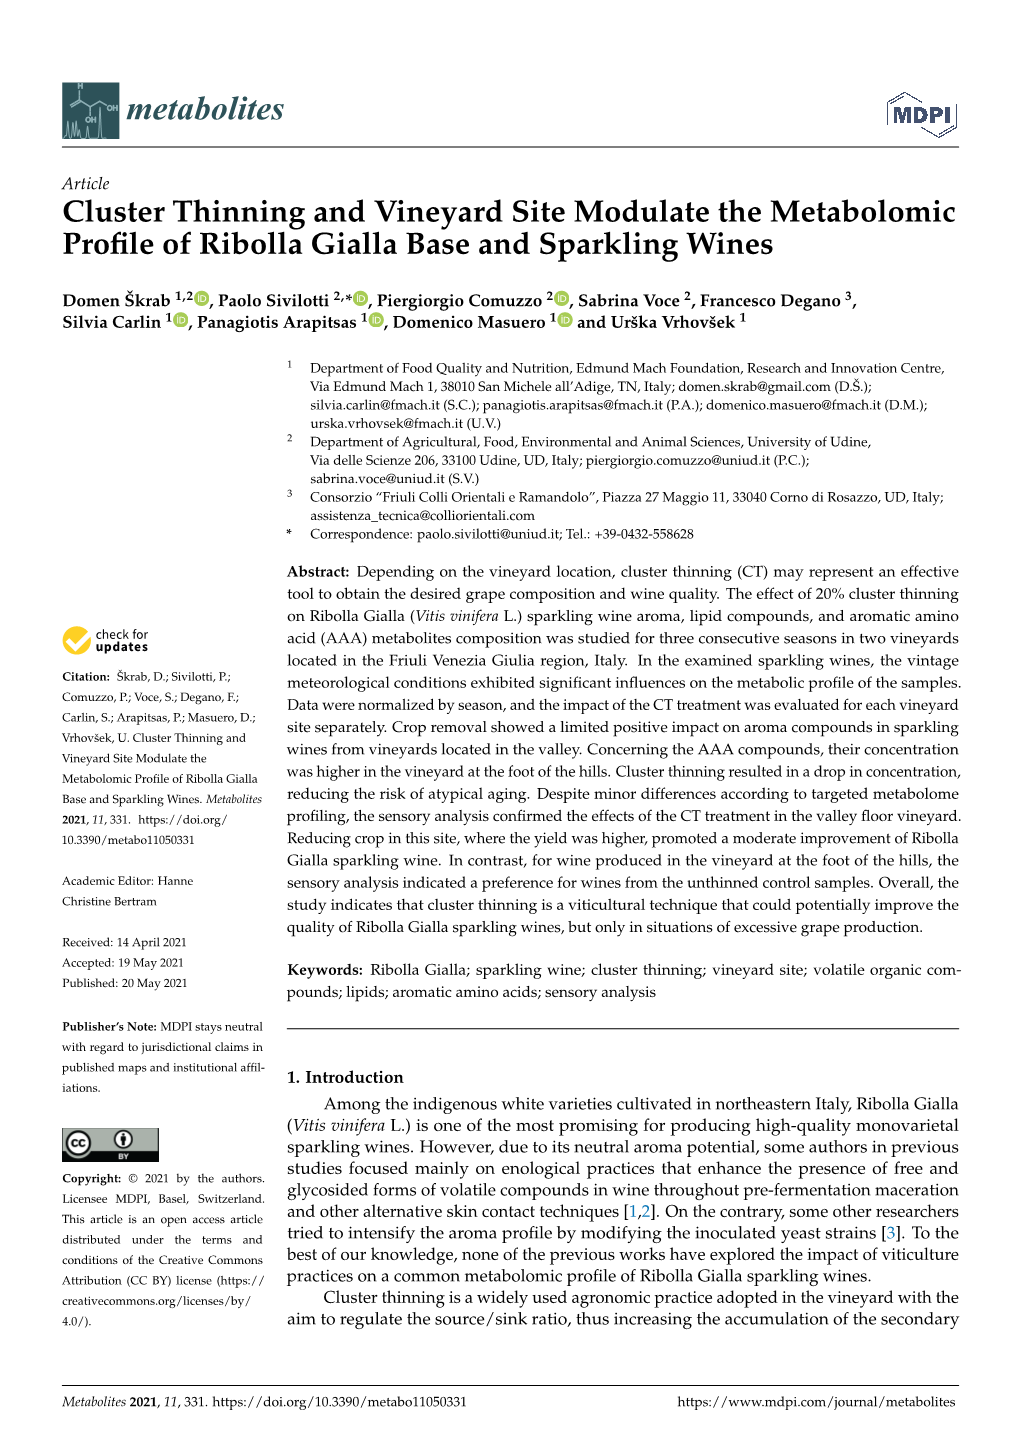 Cluster Thinning and Vineyard Site Modulate the Metabolomic Profile Of